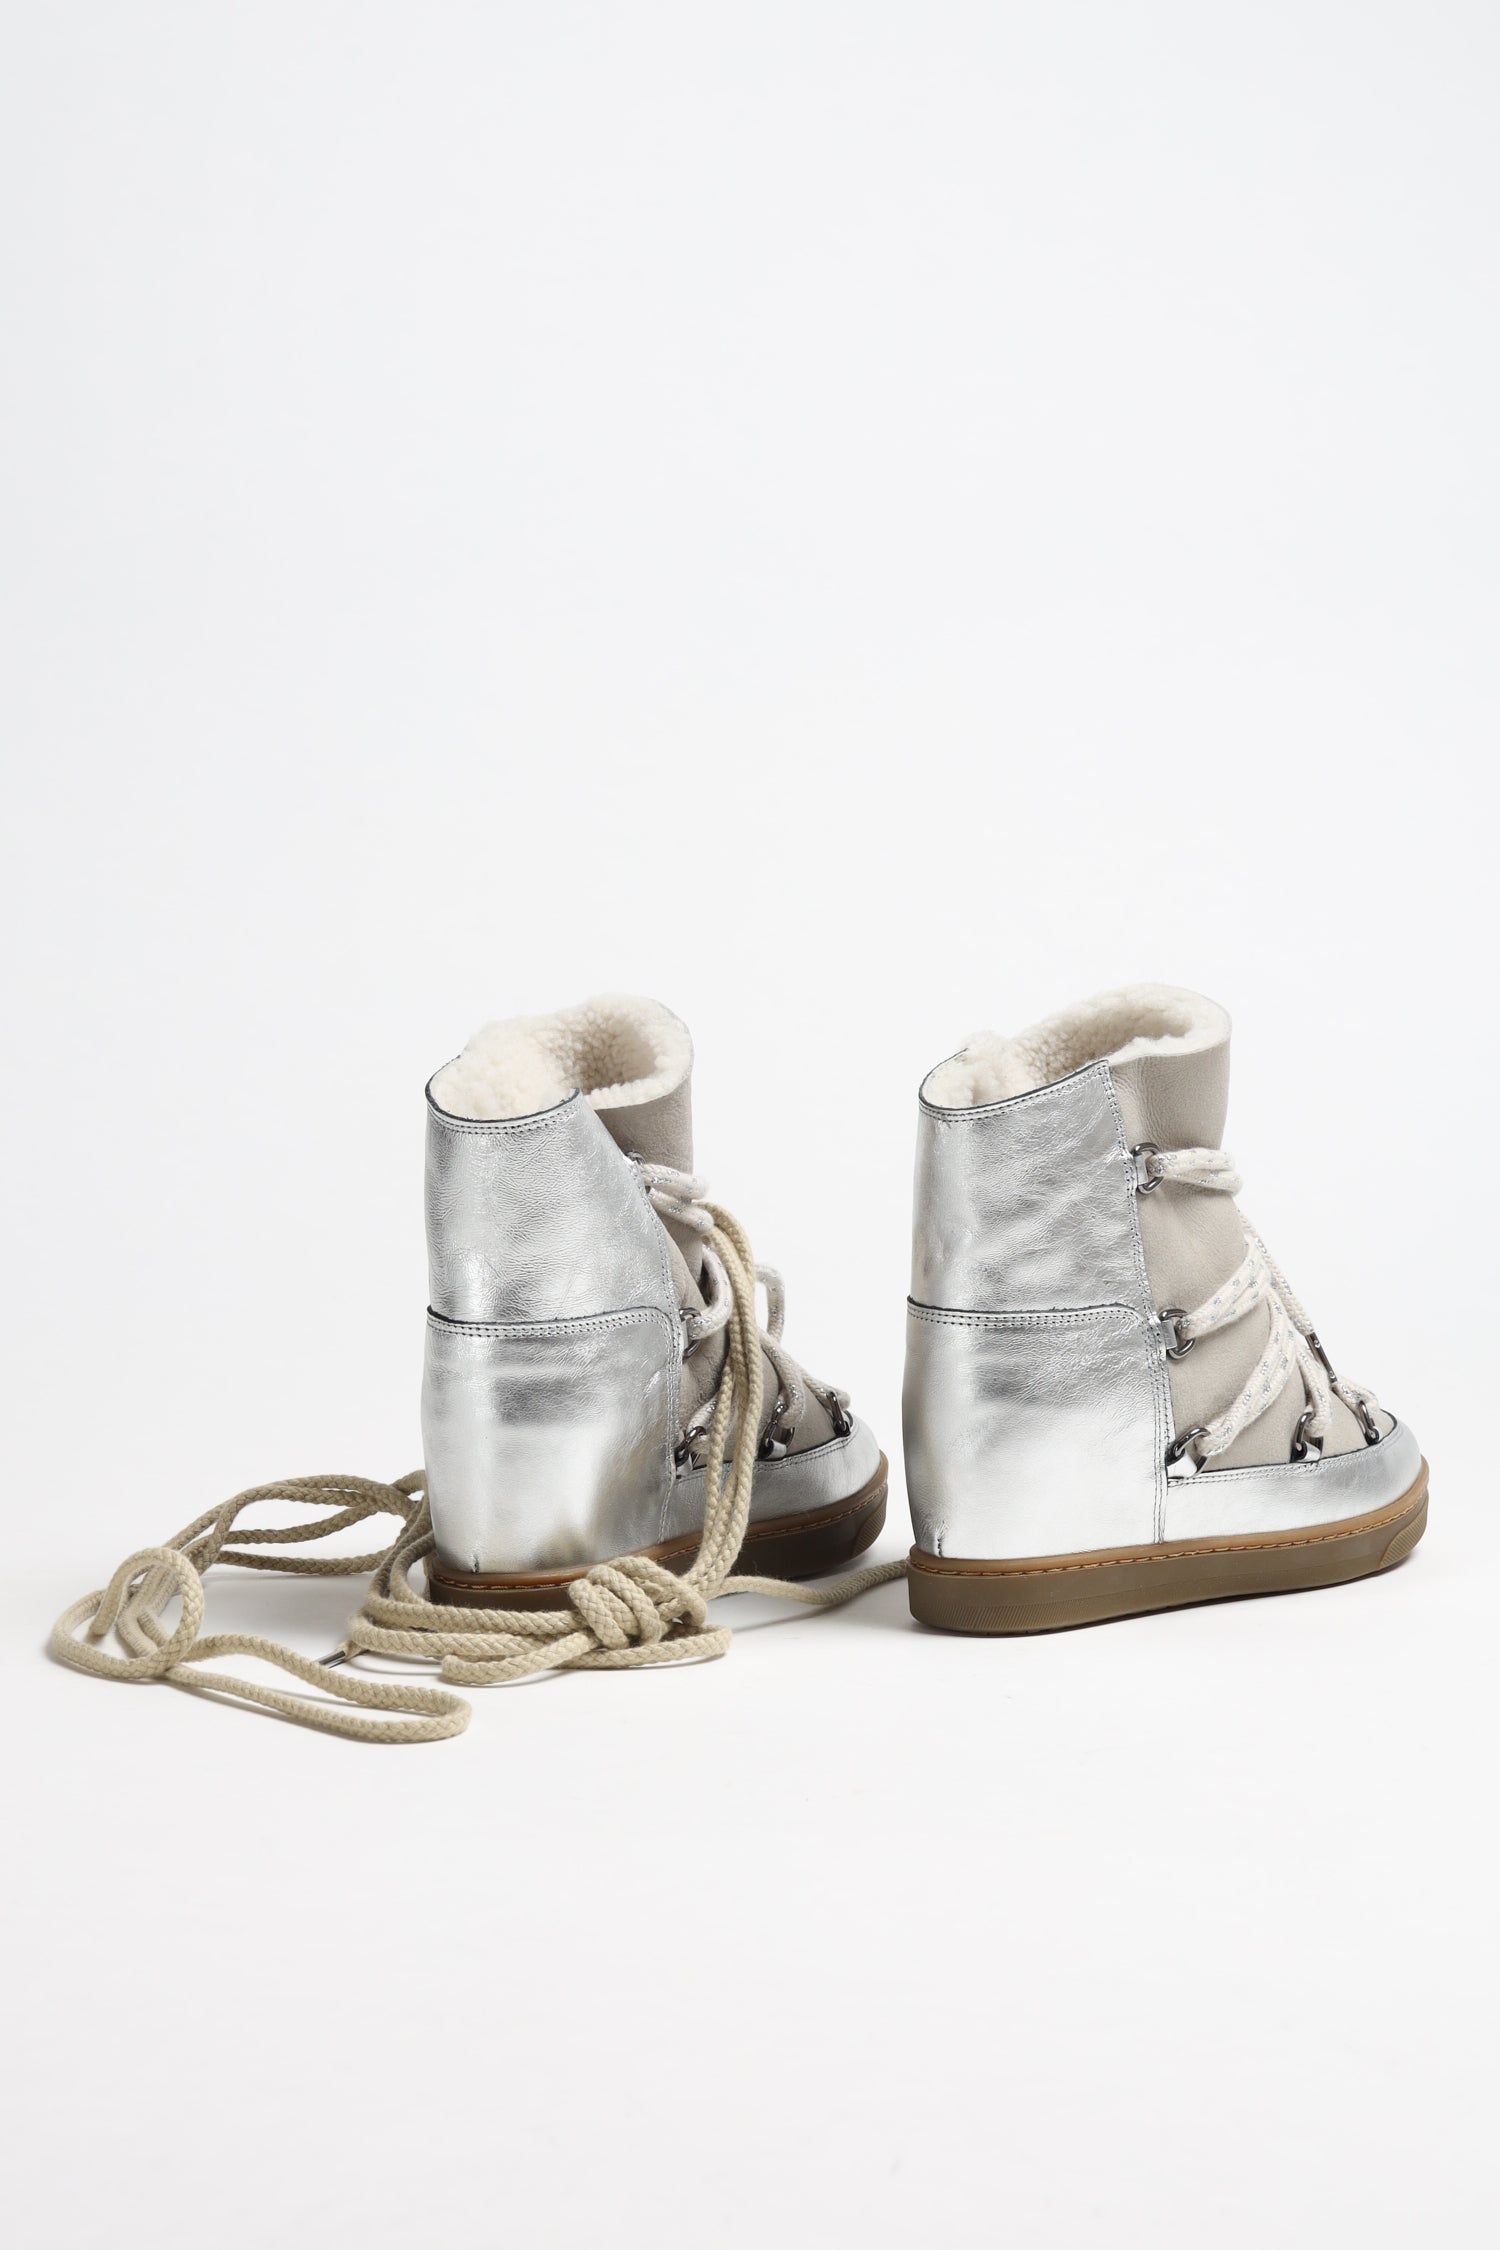 Boots Nowles in SilberIsabel Marant - Anita Hass